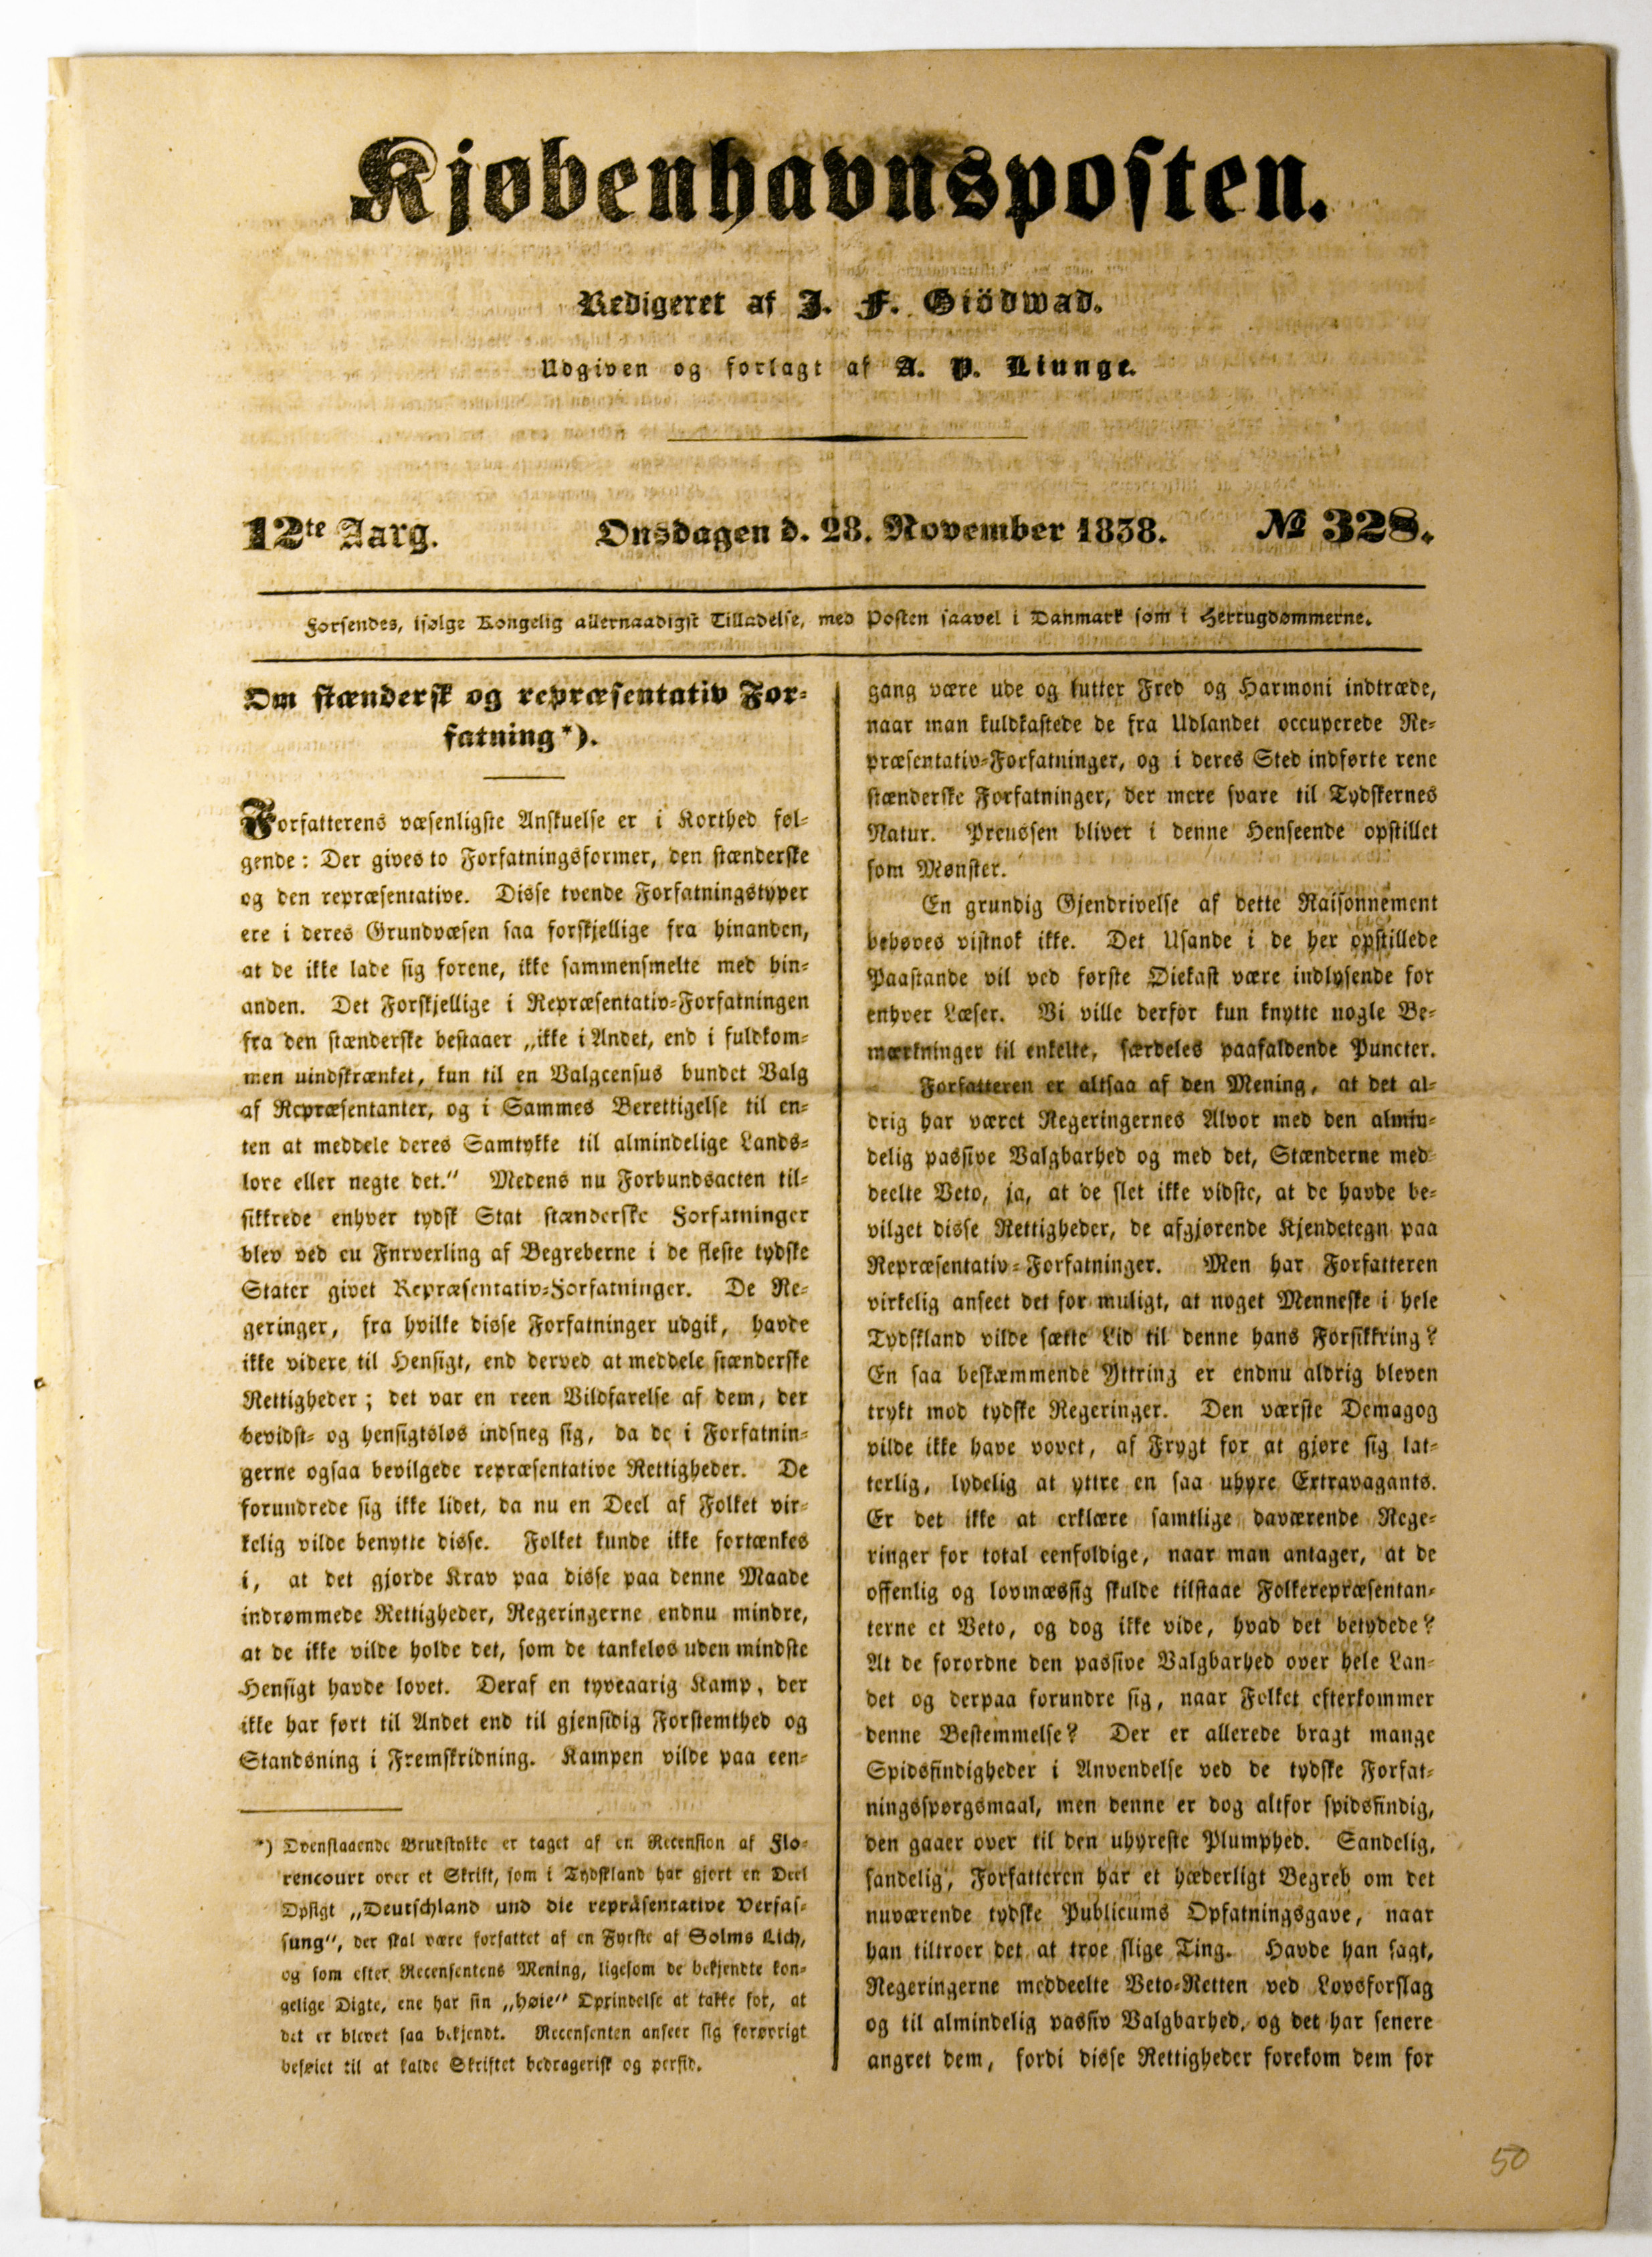 Scan of the front page of an 1838 Danish newspaper